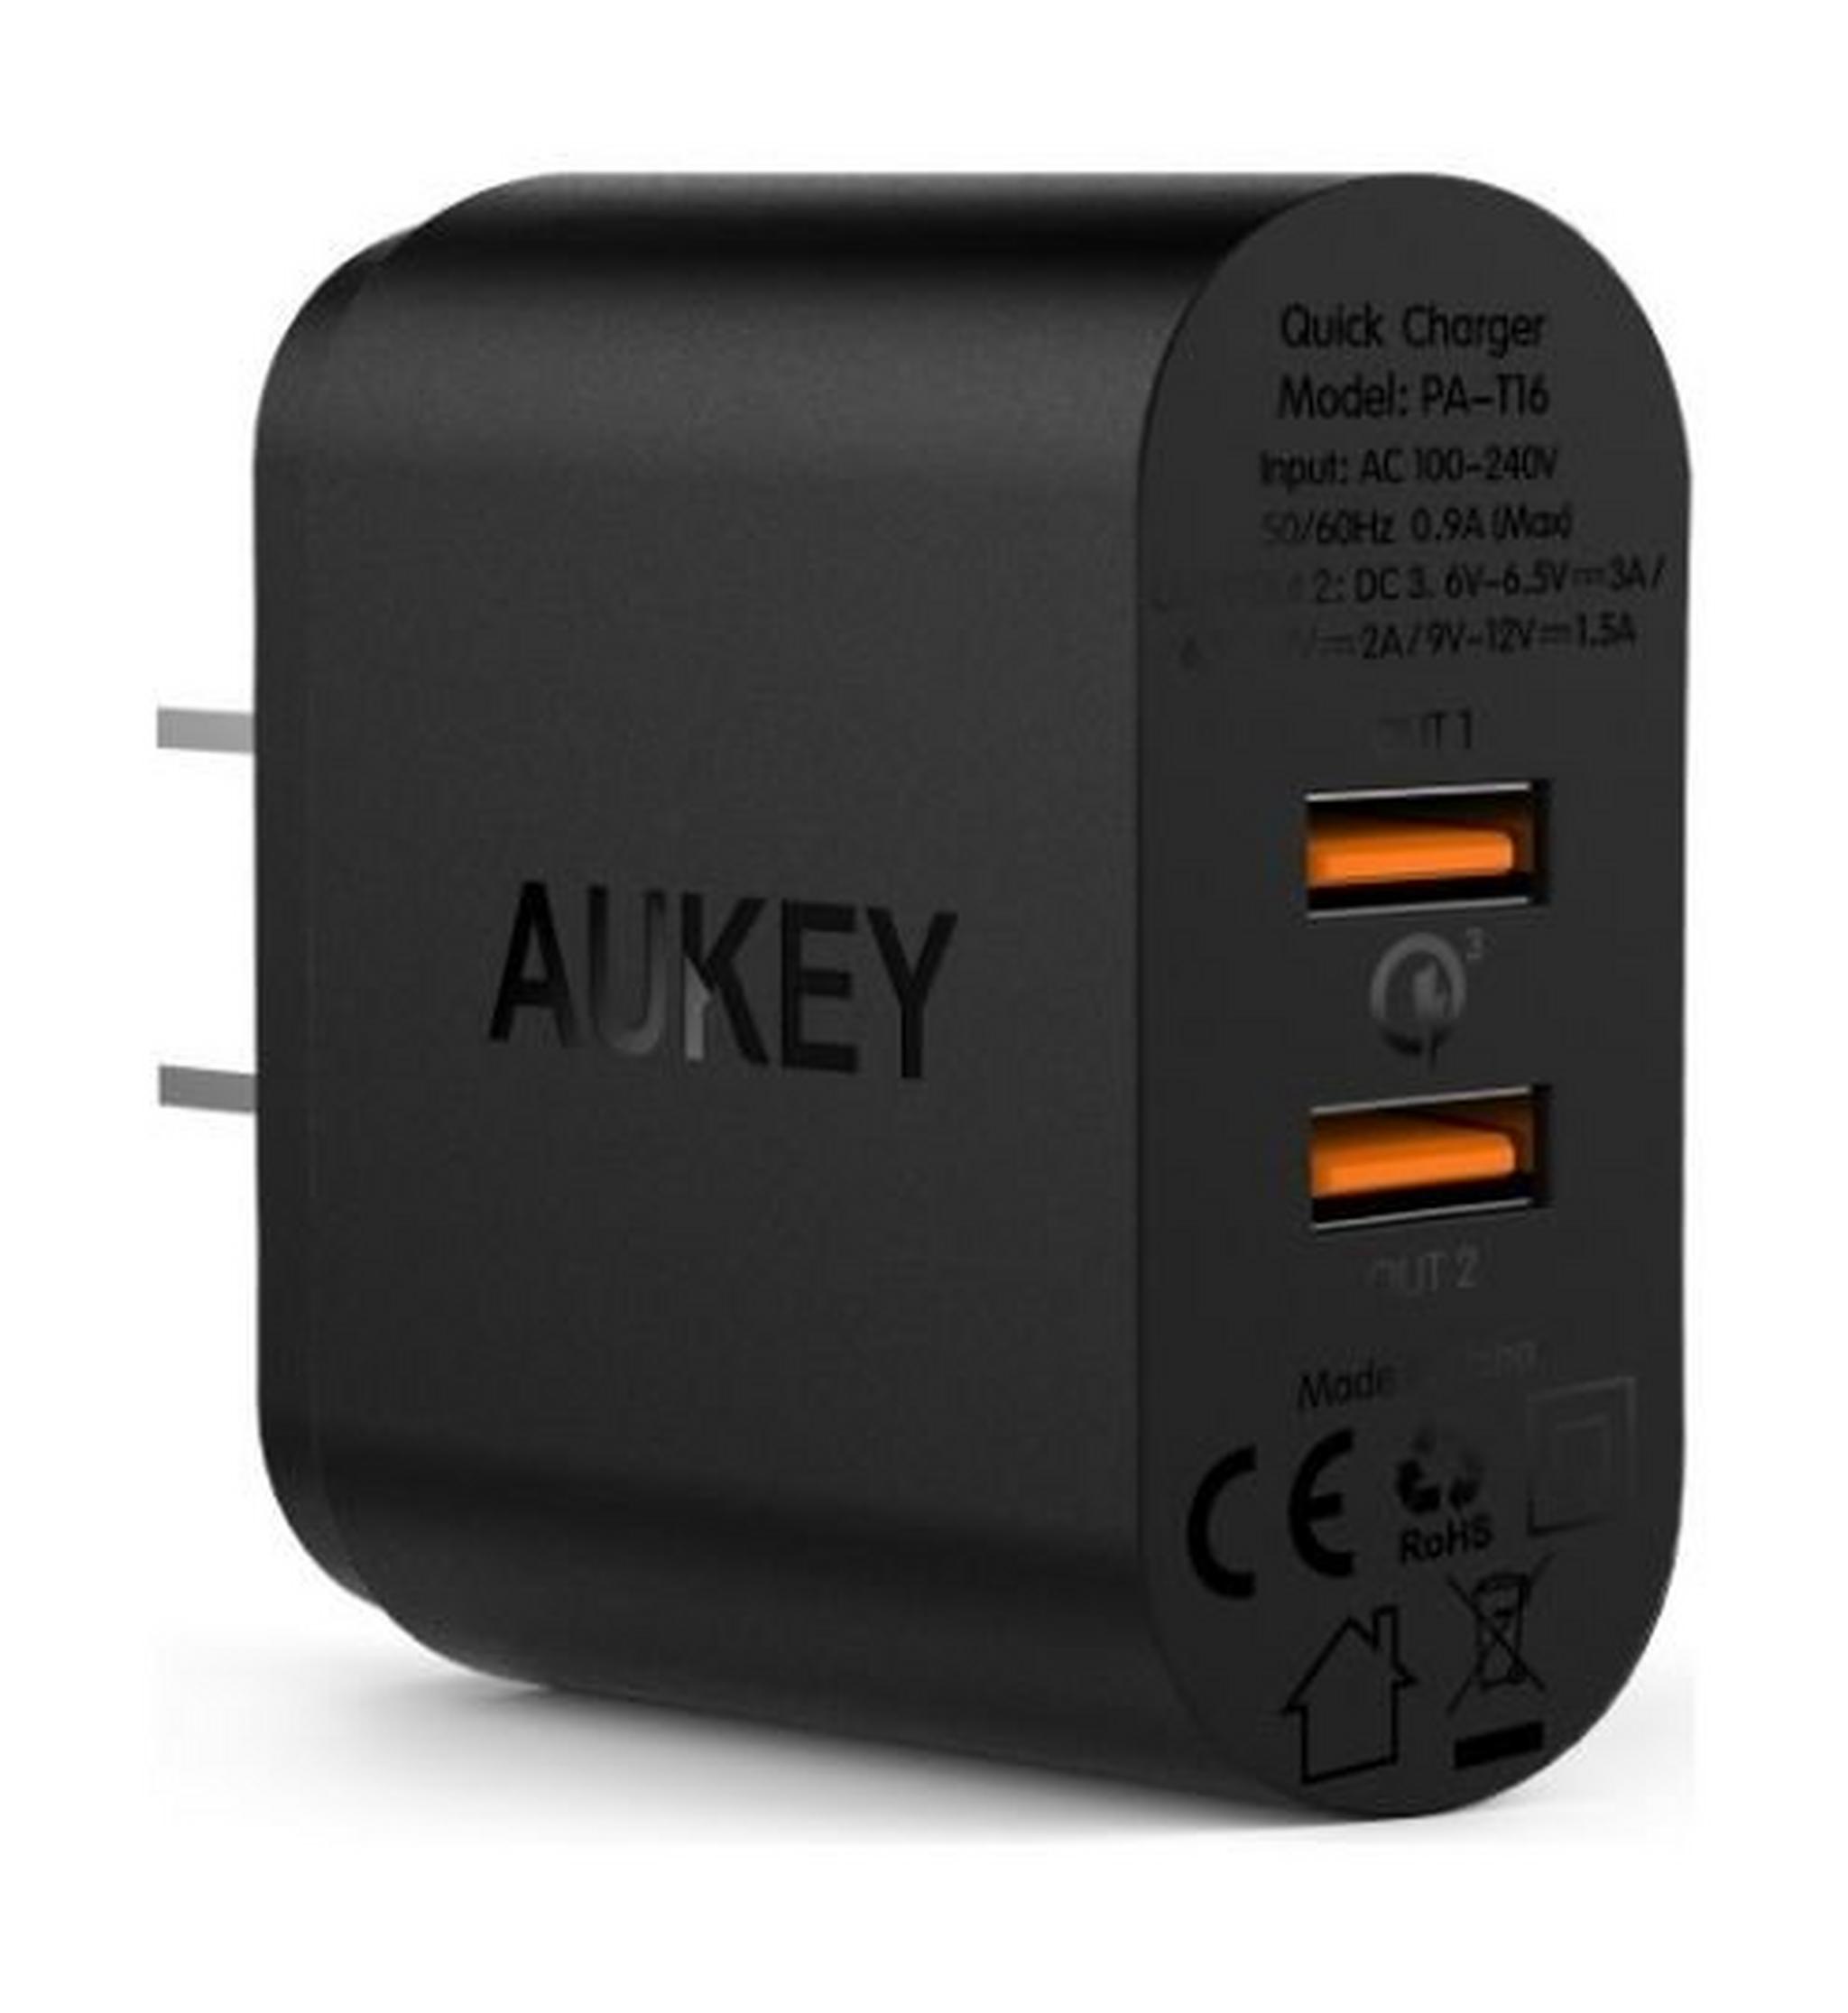 Aukey 2 Port Quick Charger 3.0 Wall Charger